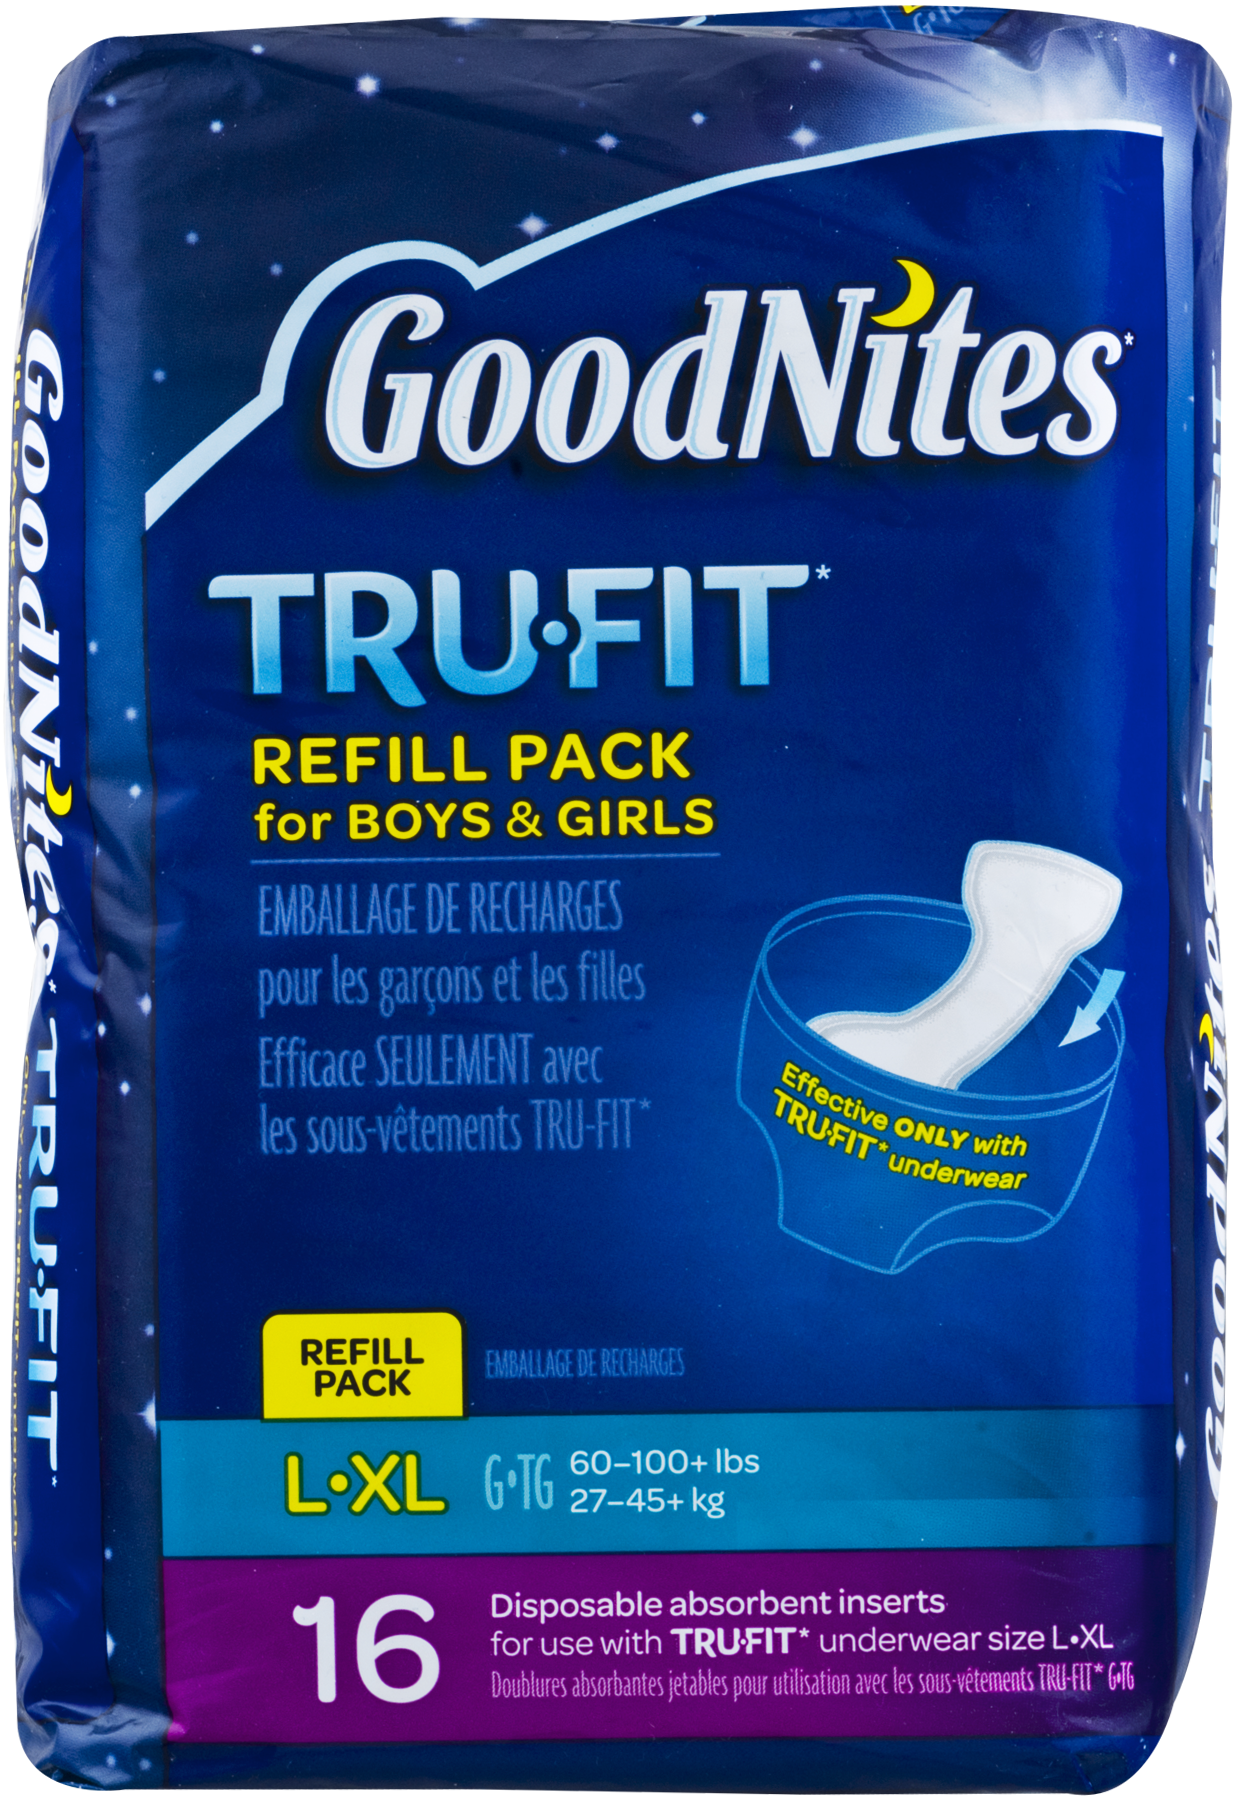 GoodNites TruFit Refill Pack Disposable Absorbent Inserts for Boys & Girls L/LX - 16 CT - image 3 of 13